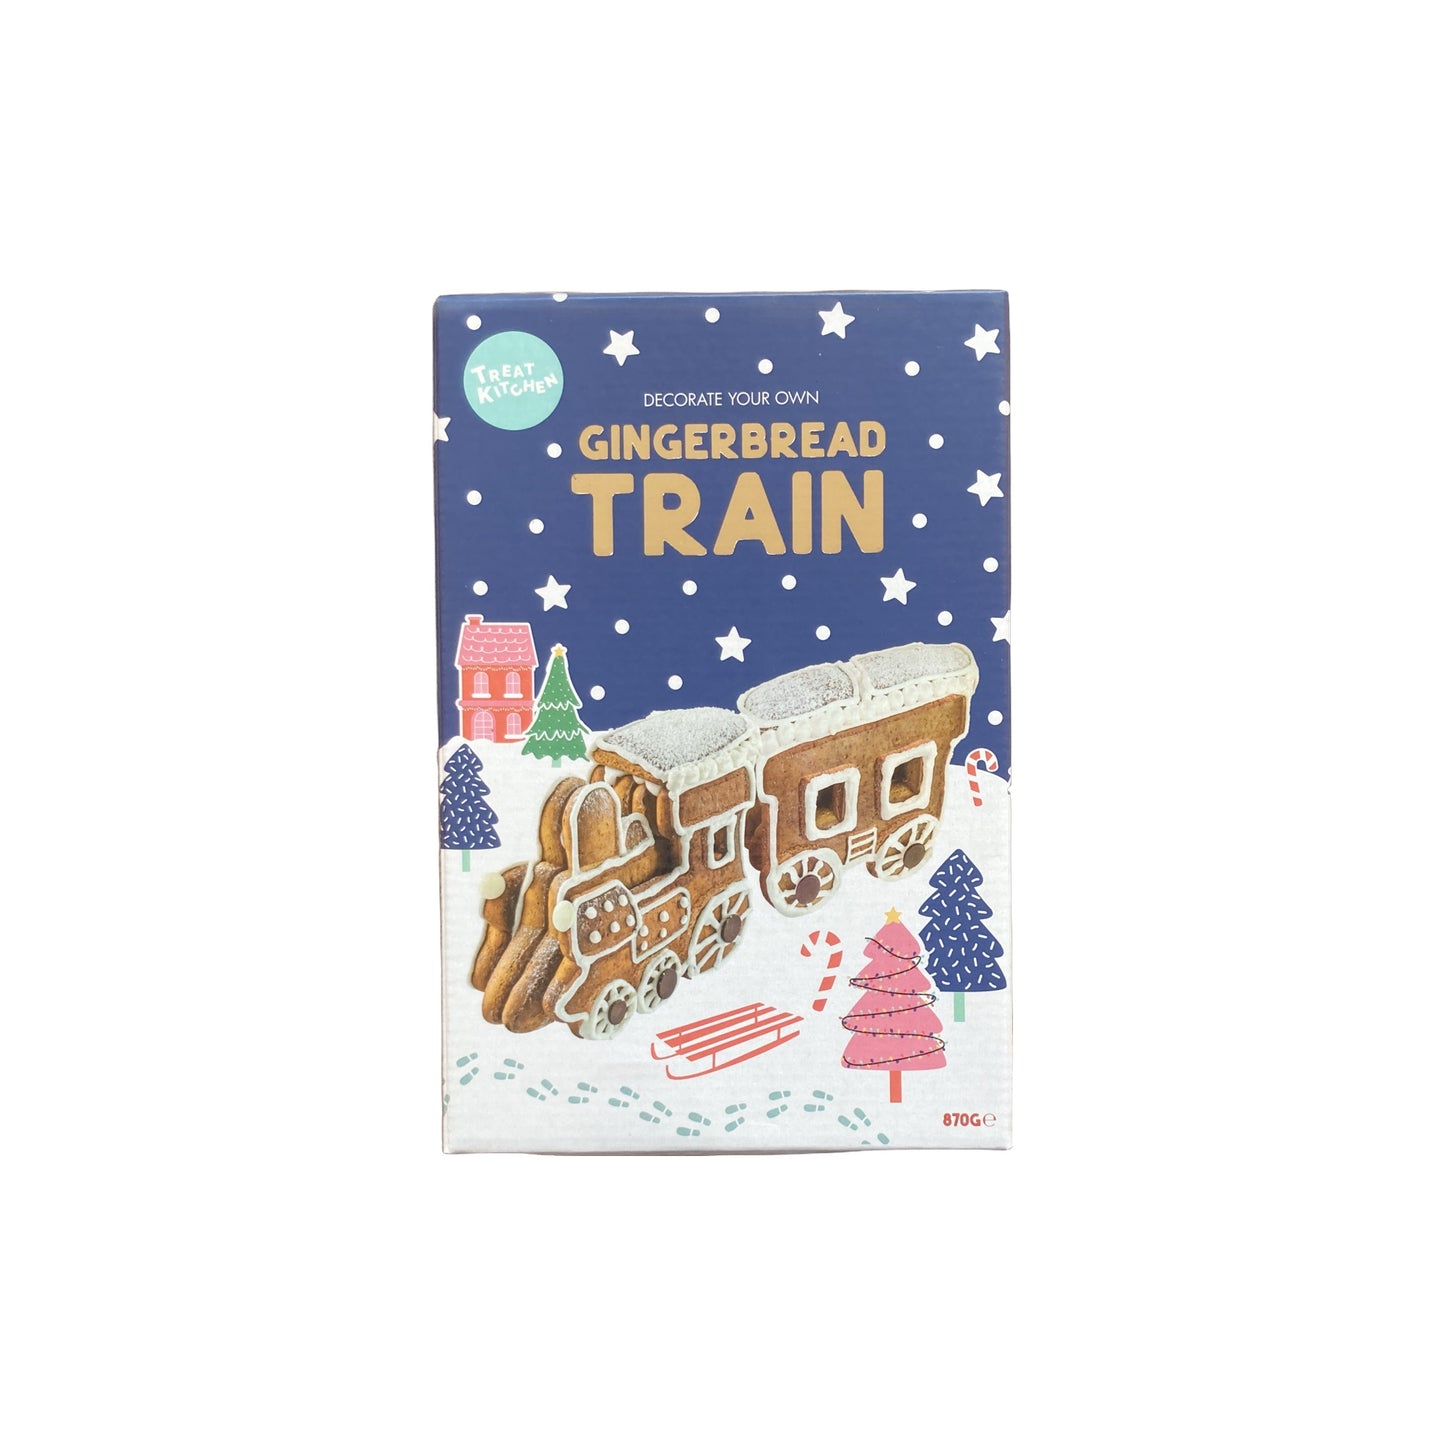 Decorate Your Own Ginger Bread Train - Treat Kitchen 870g